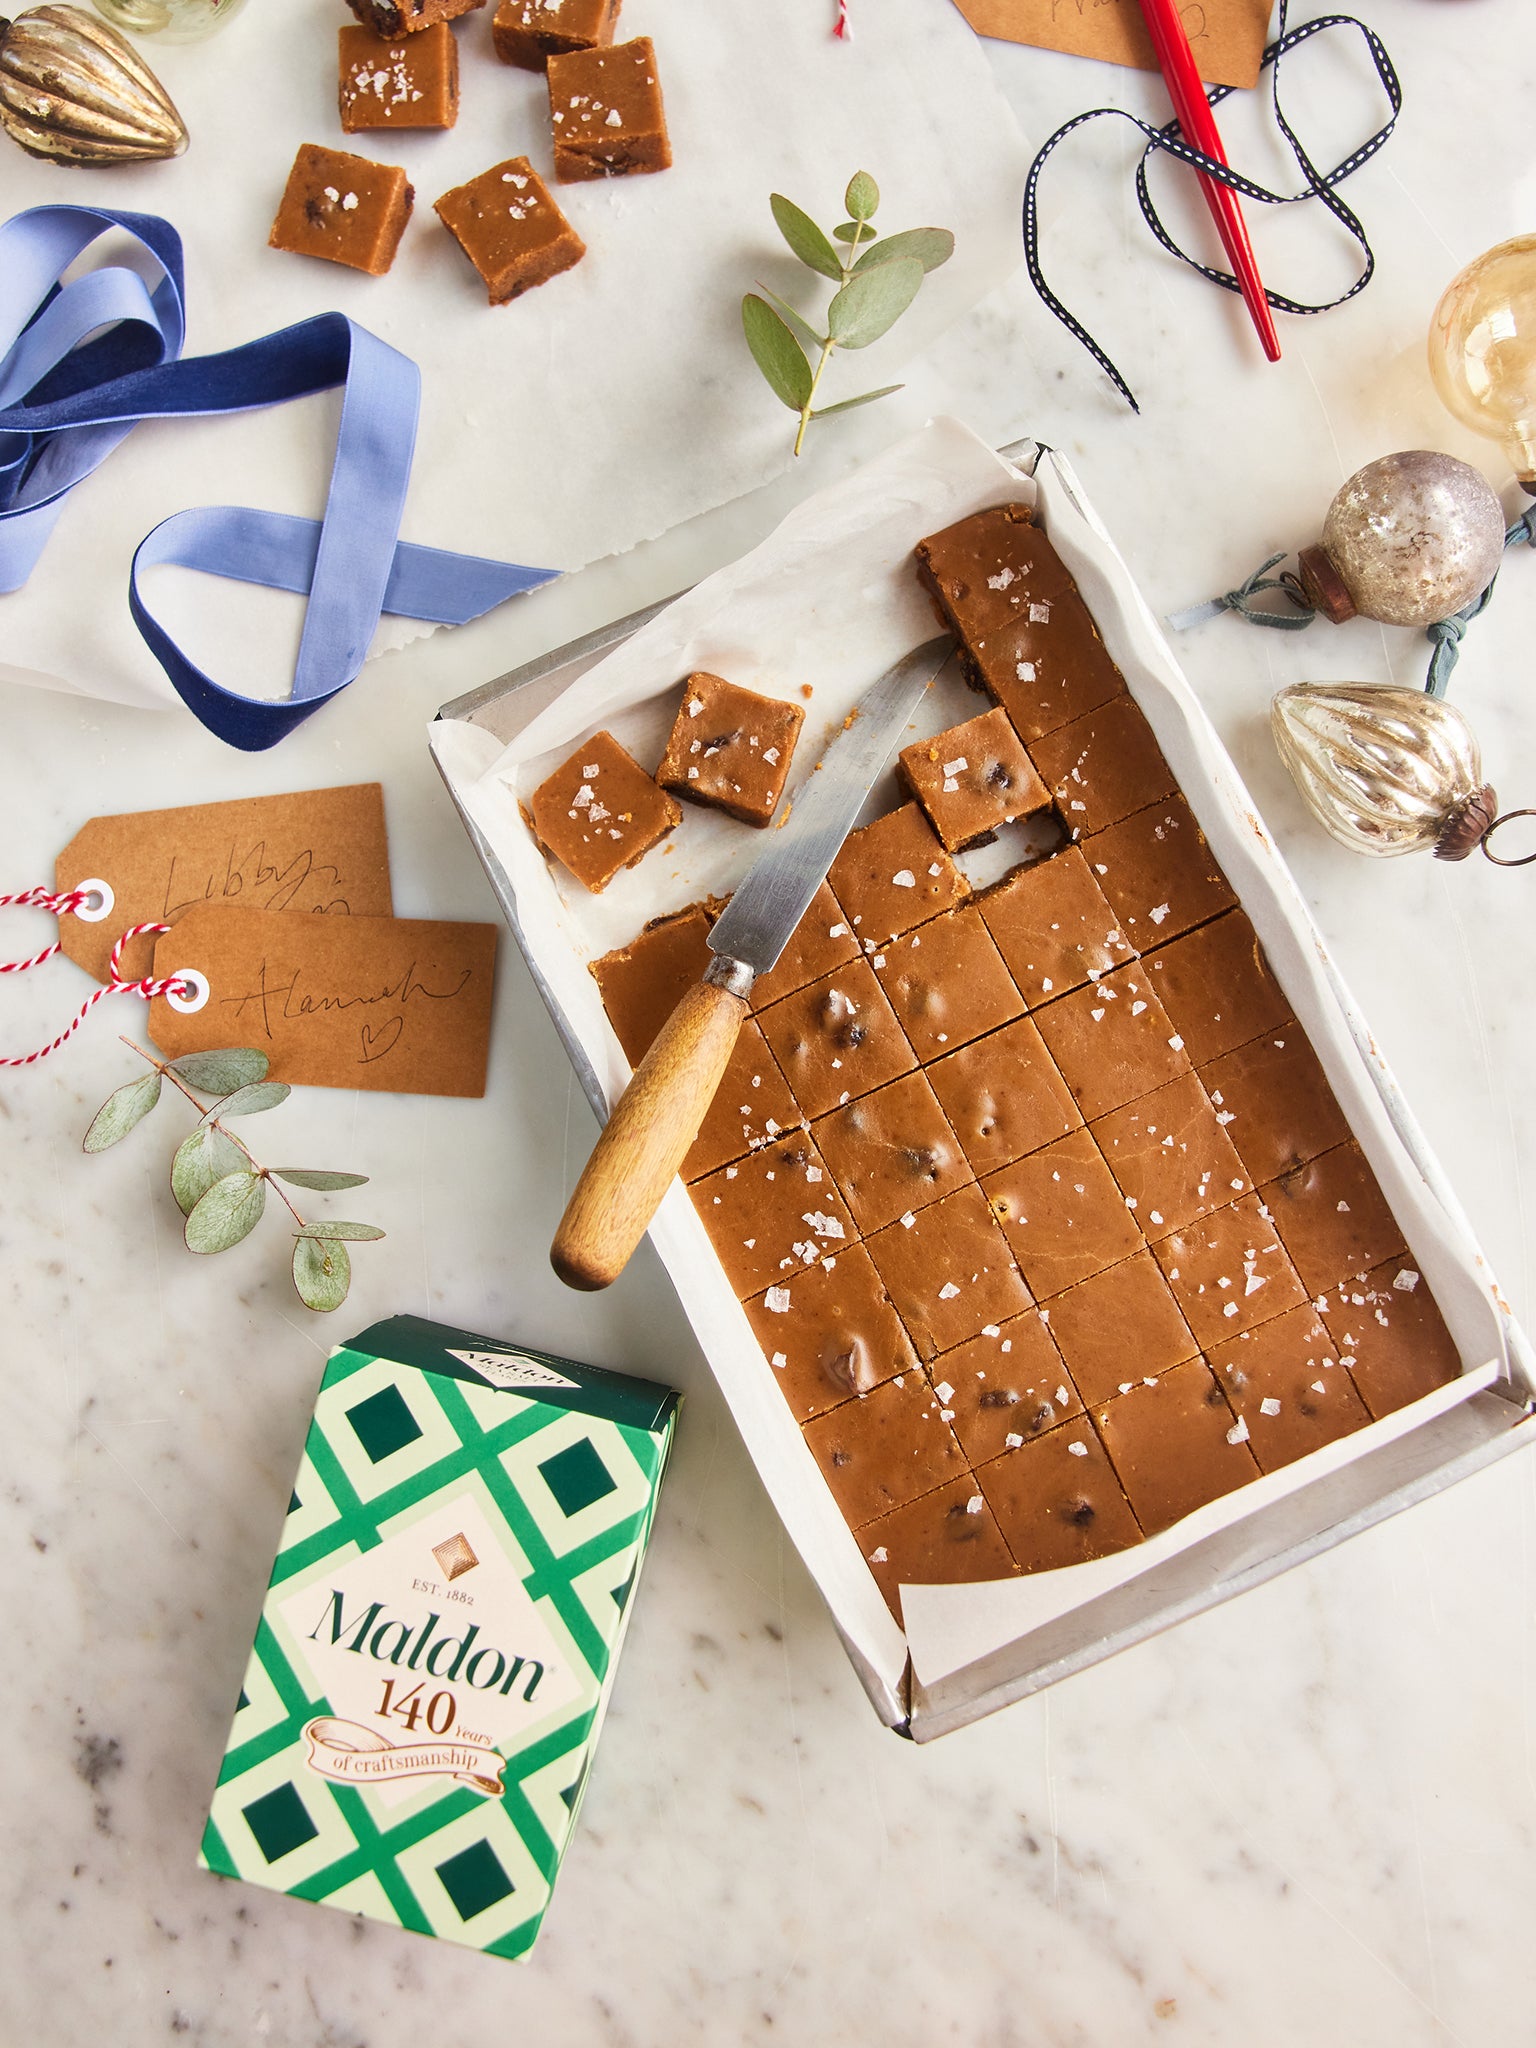 This fudge will put a childish grin on the grownups’ faces